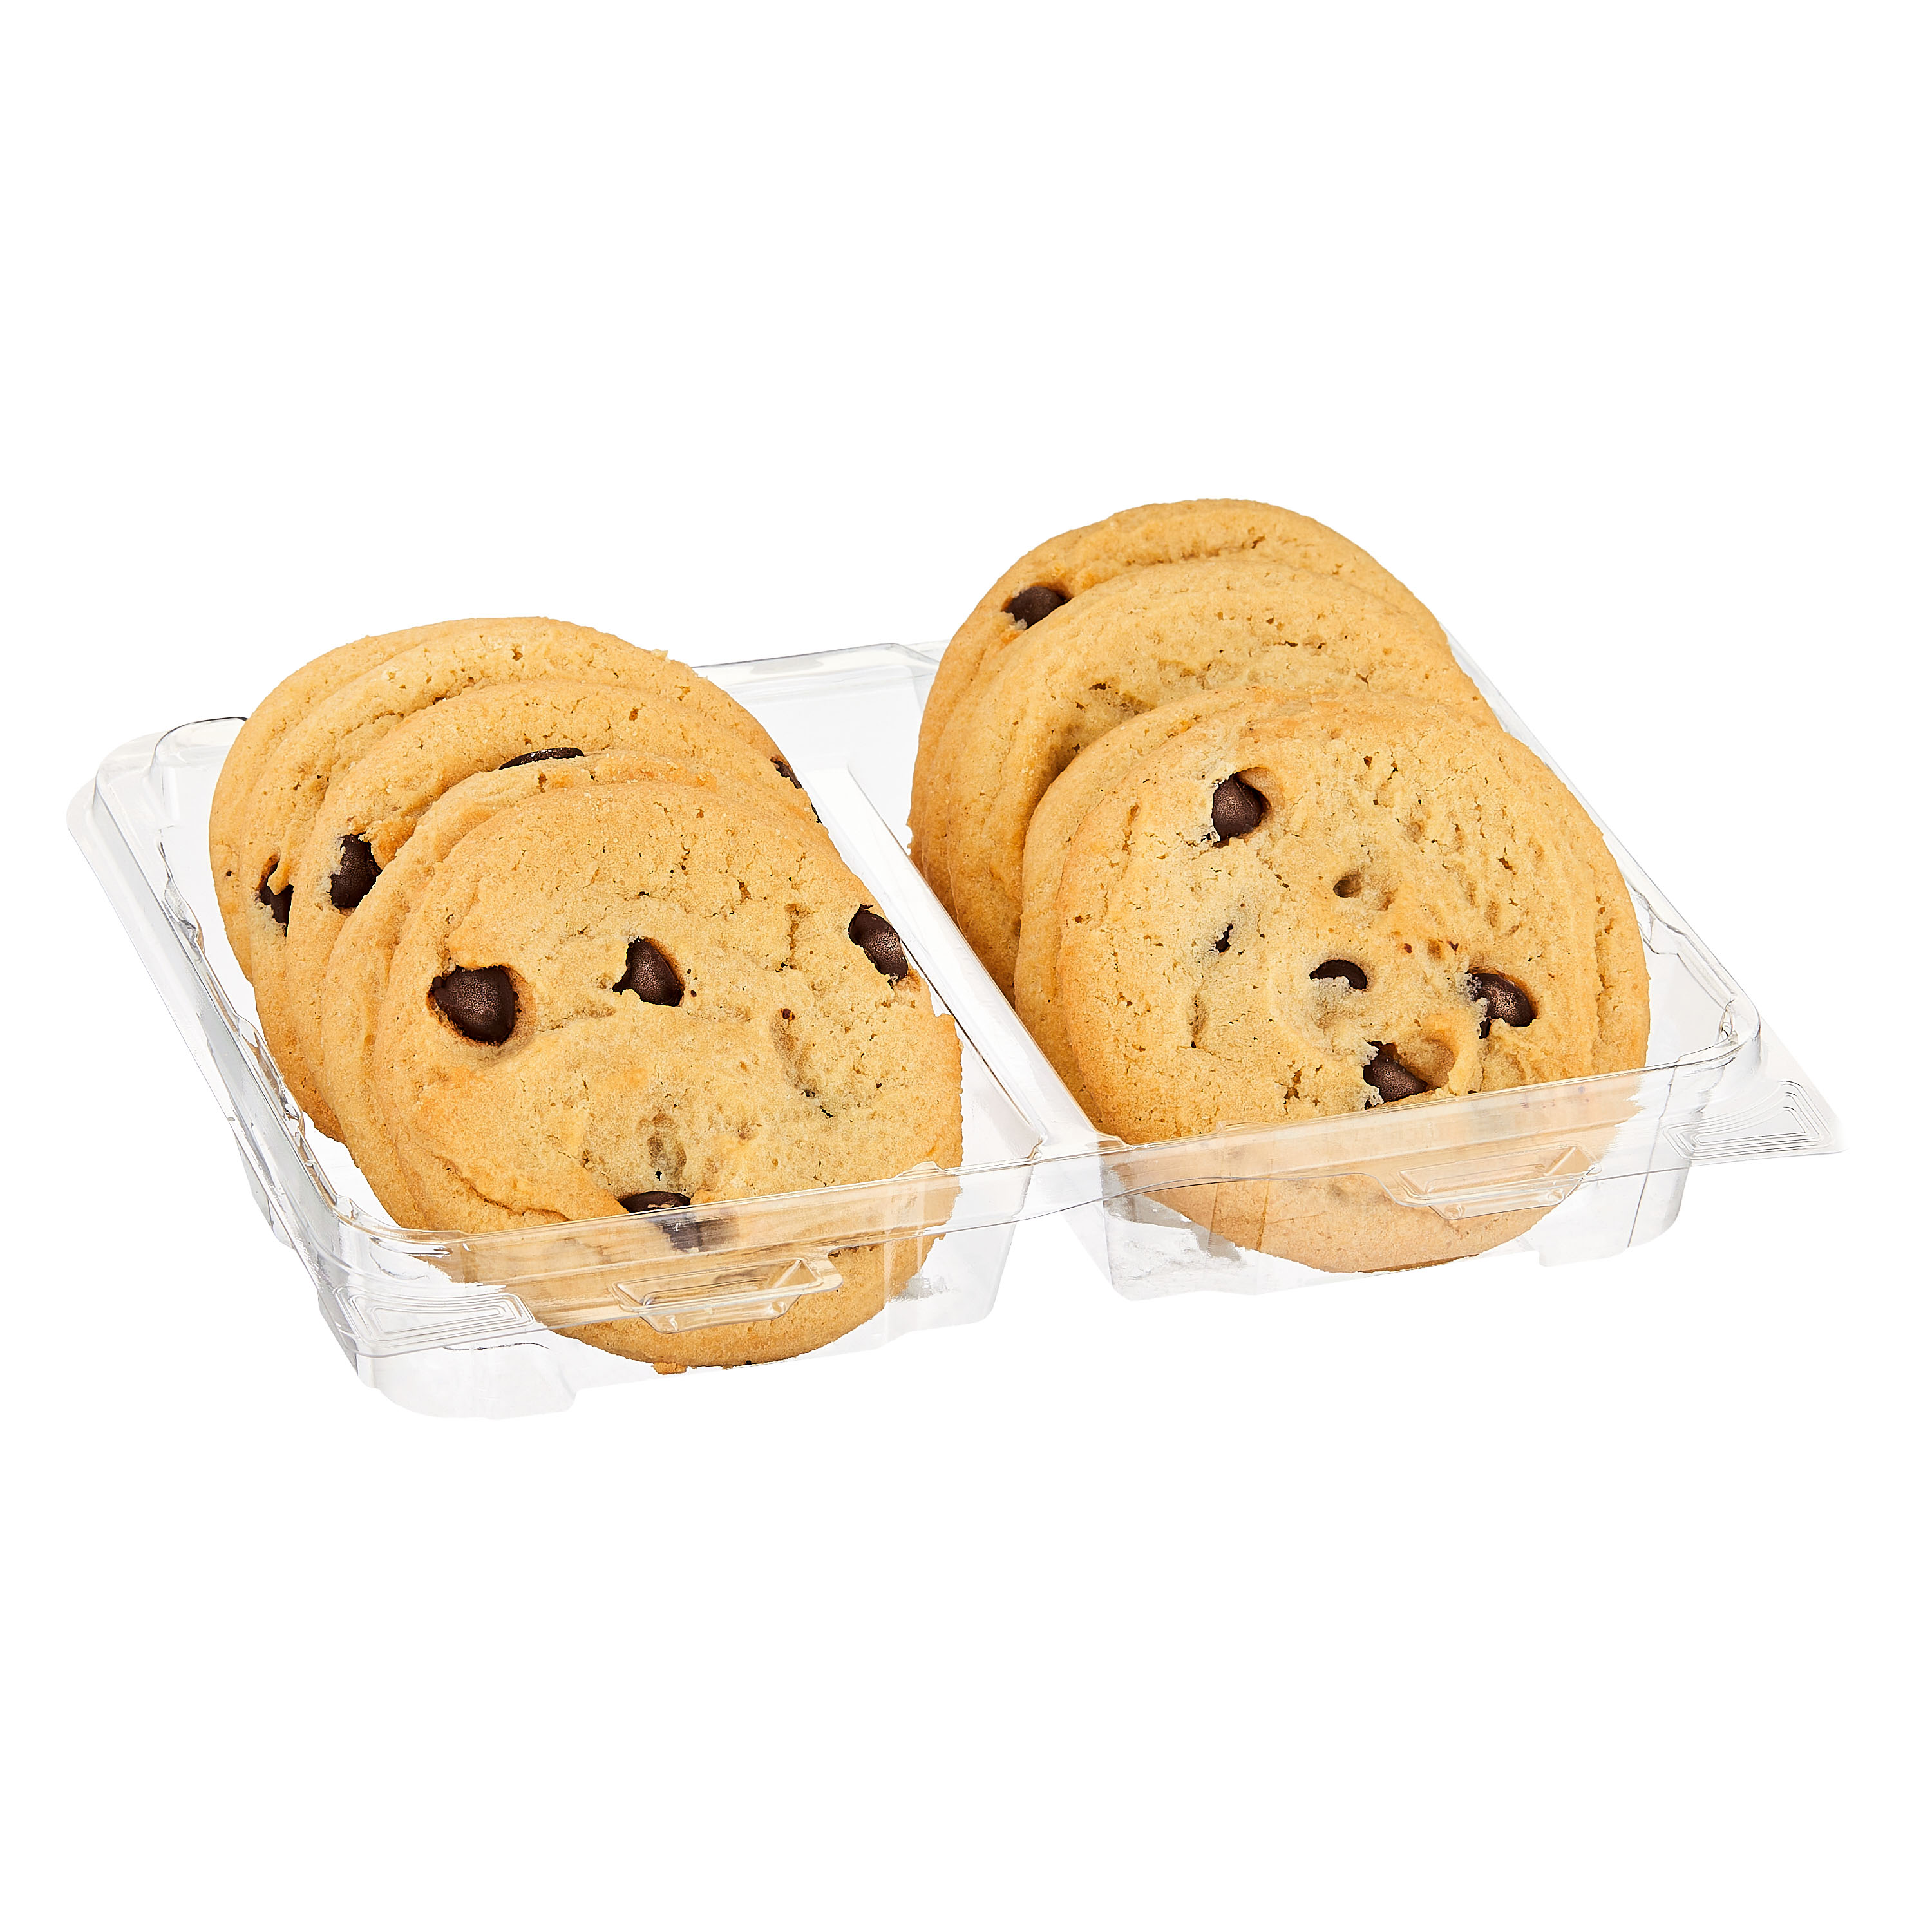 Freshness Guaranteed Chocolate Chip Bakery Cookies, 14 oz, 10 Count - image 1 of 8